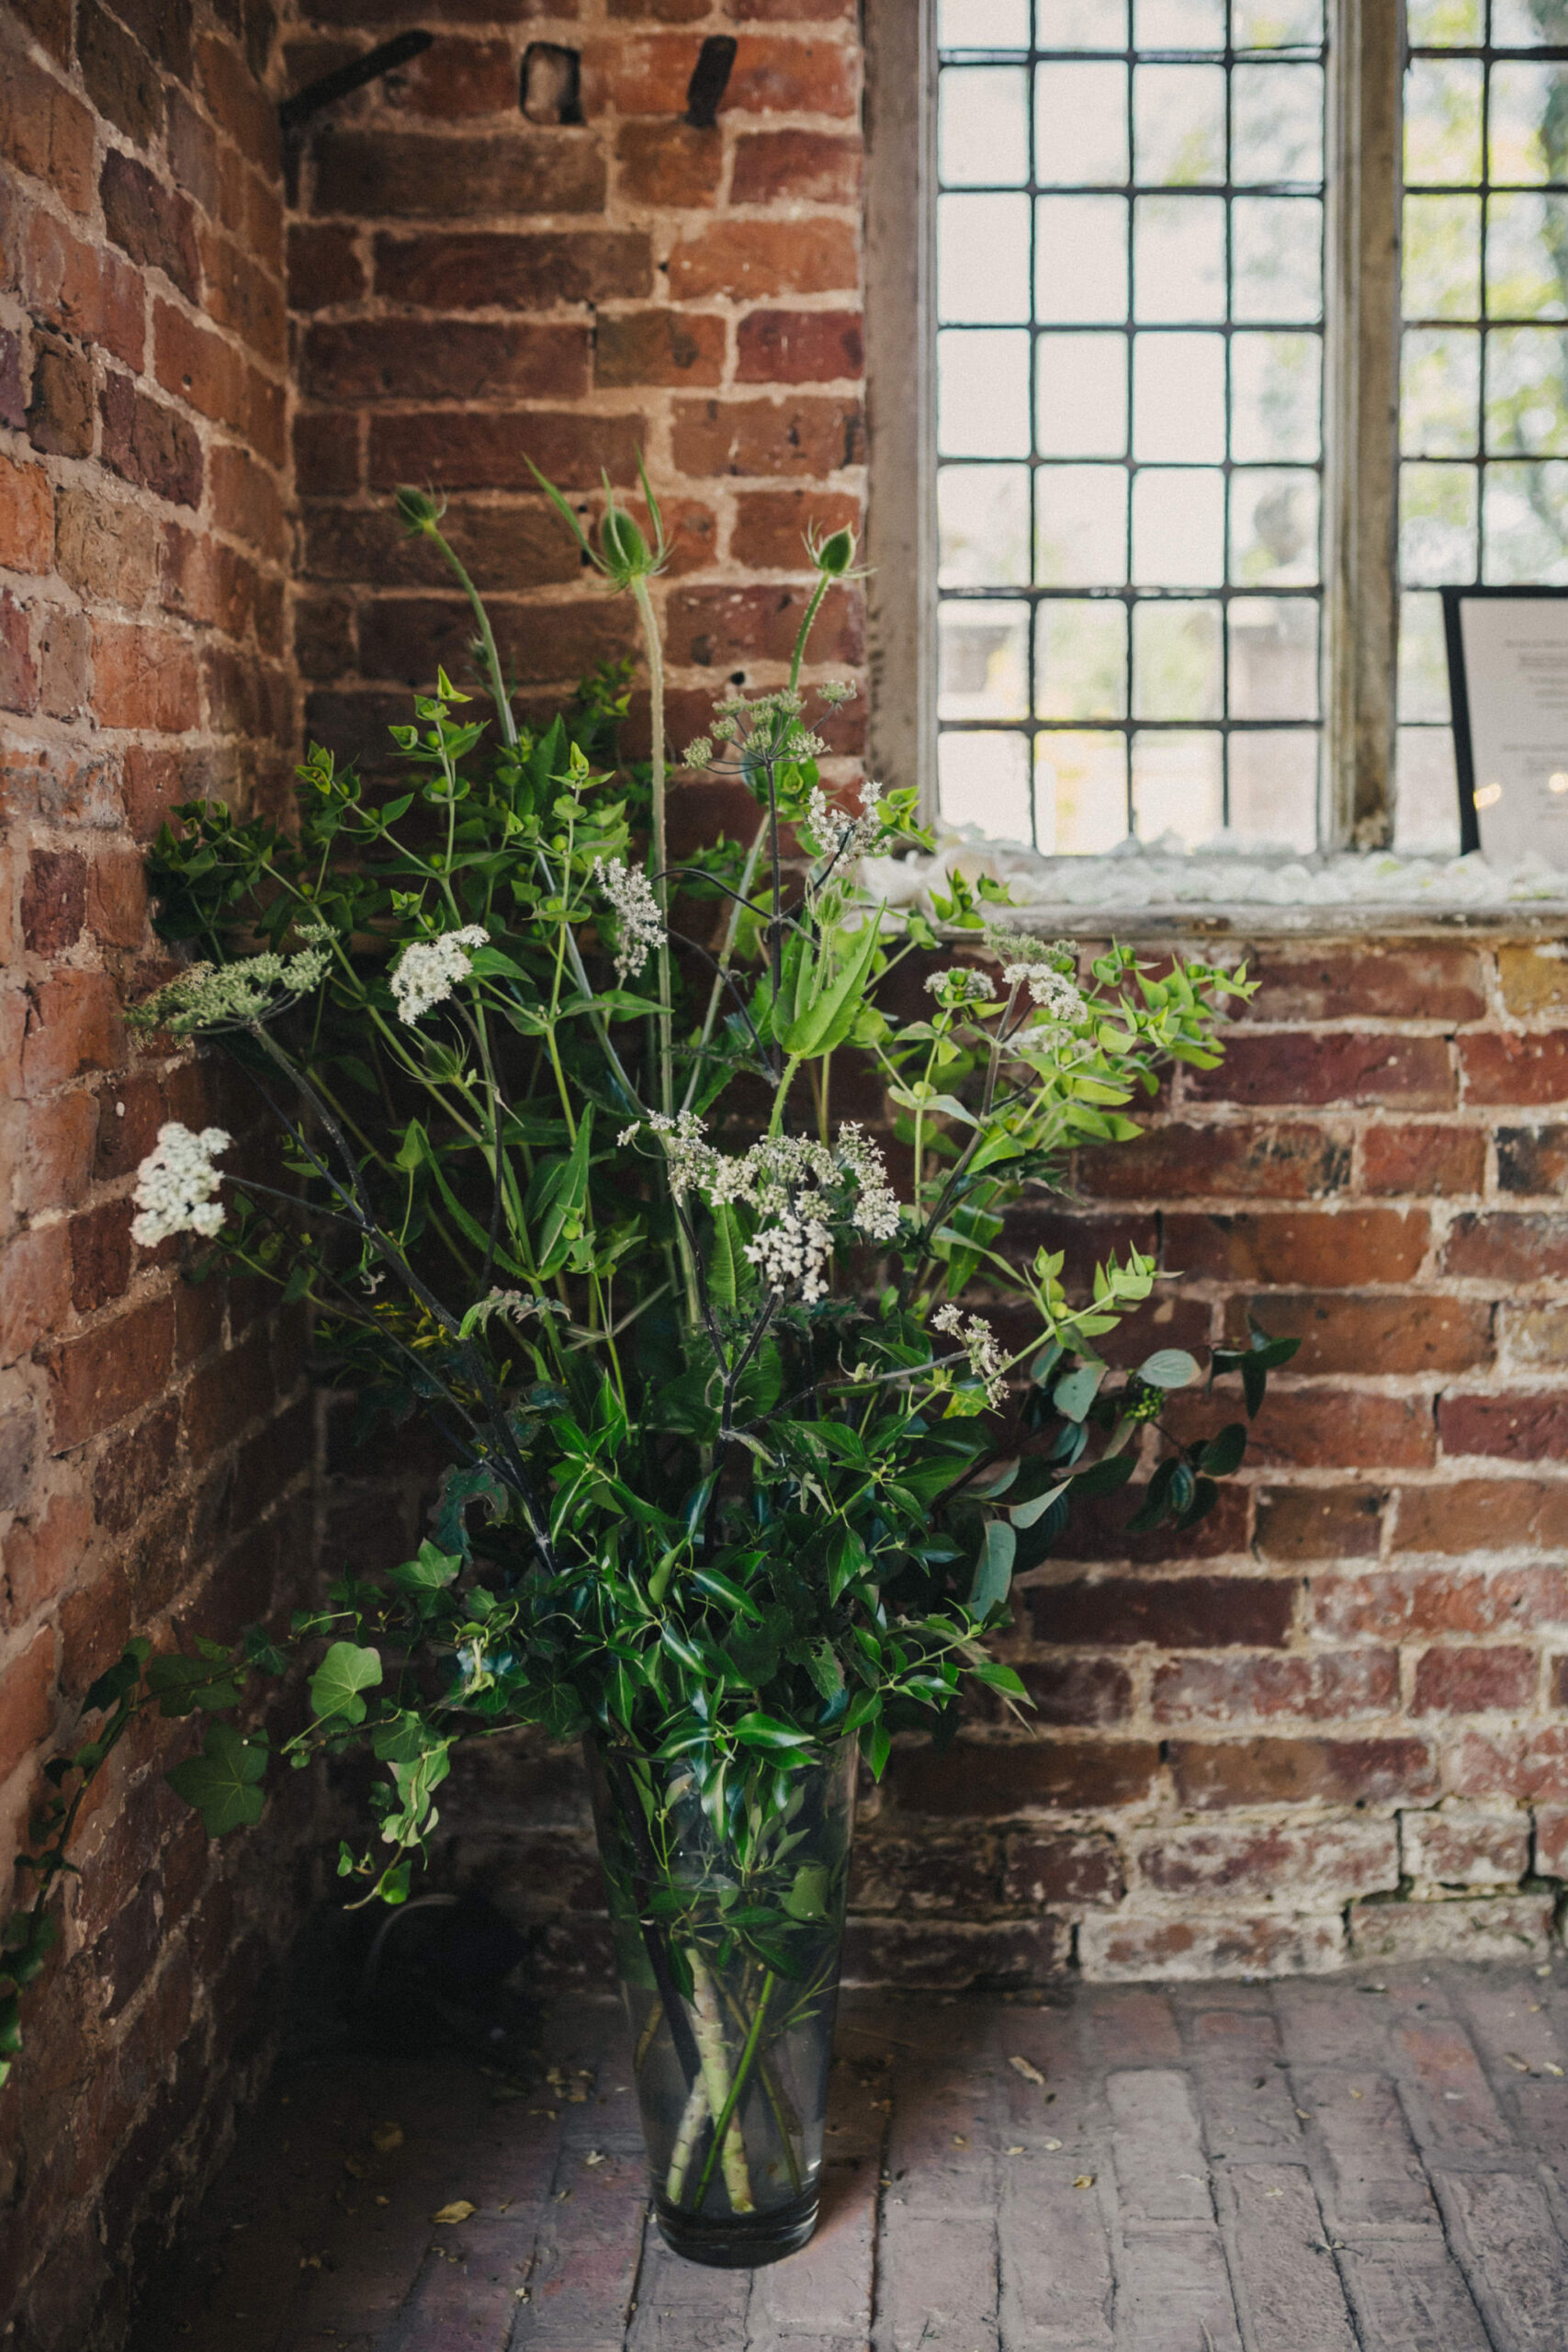 A lush green floral arrangement with white accents sits on the floor of a building that has exposed red brick walls and a wooden untreated floor